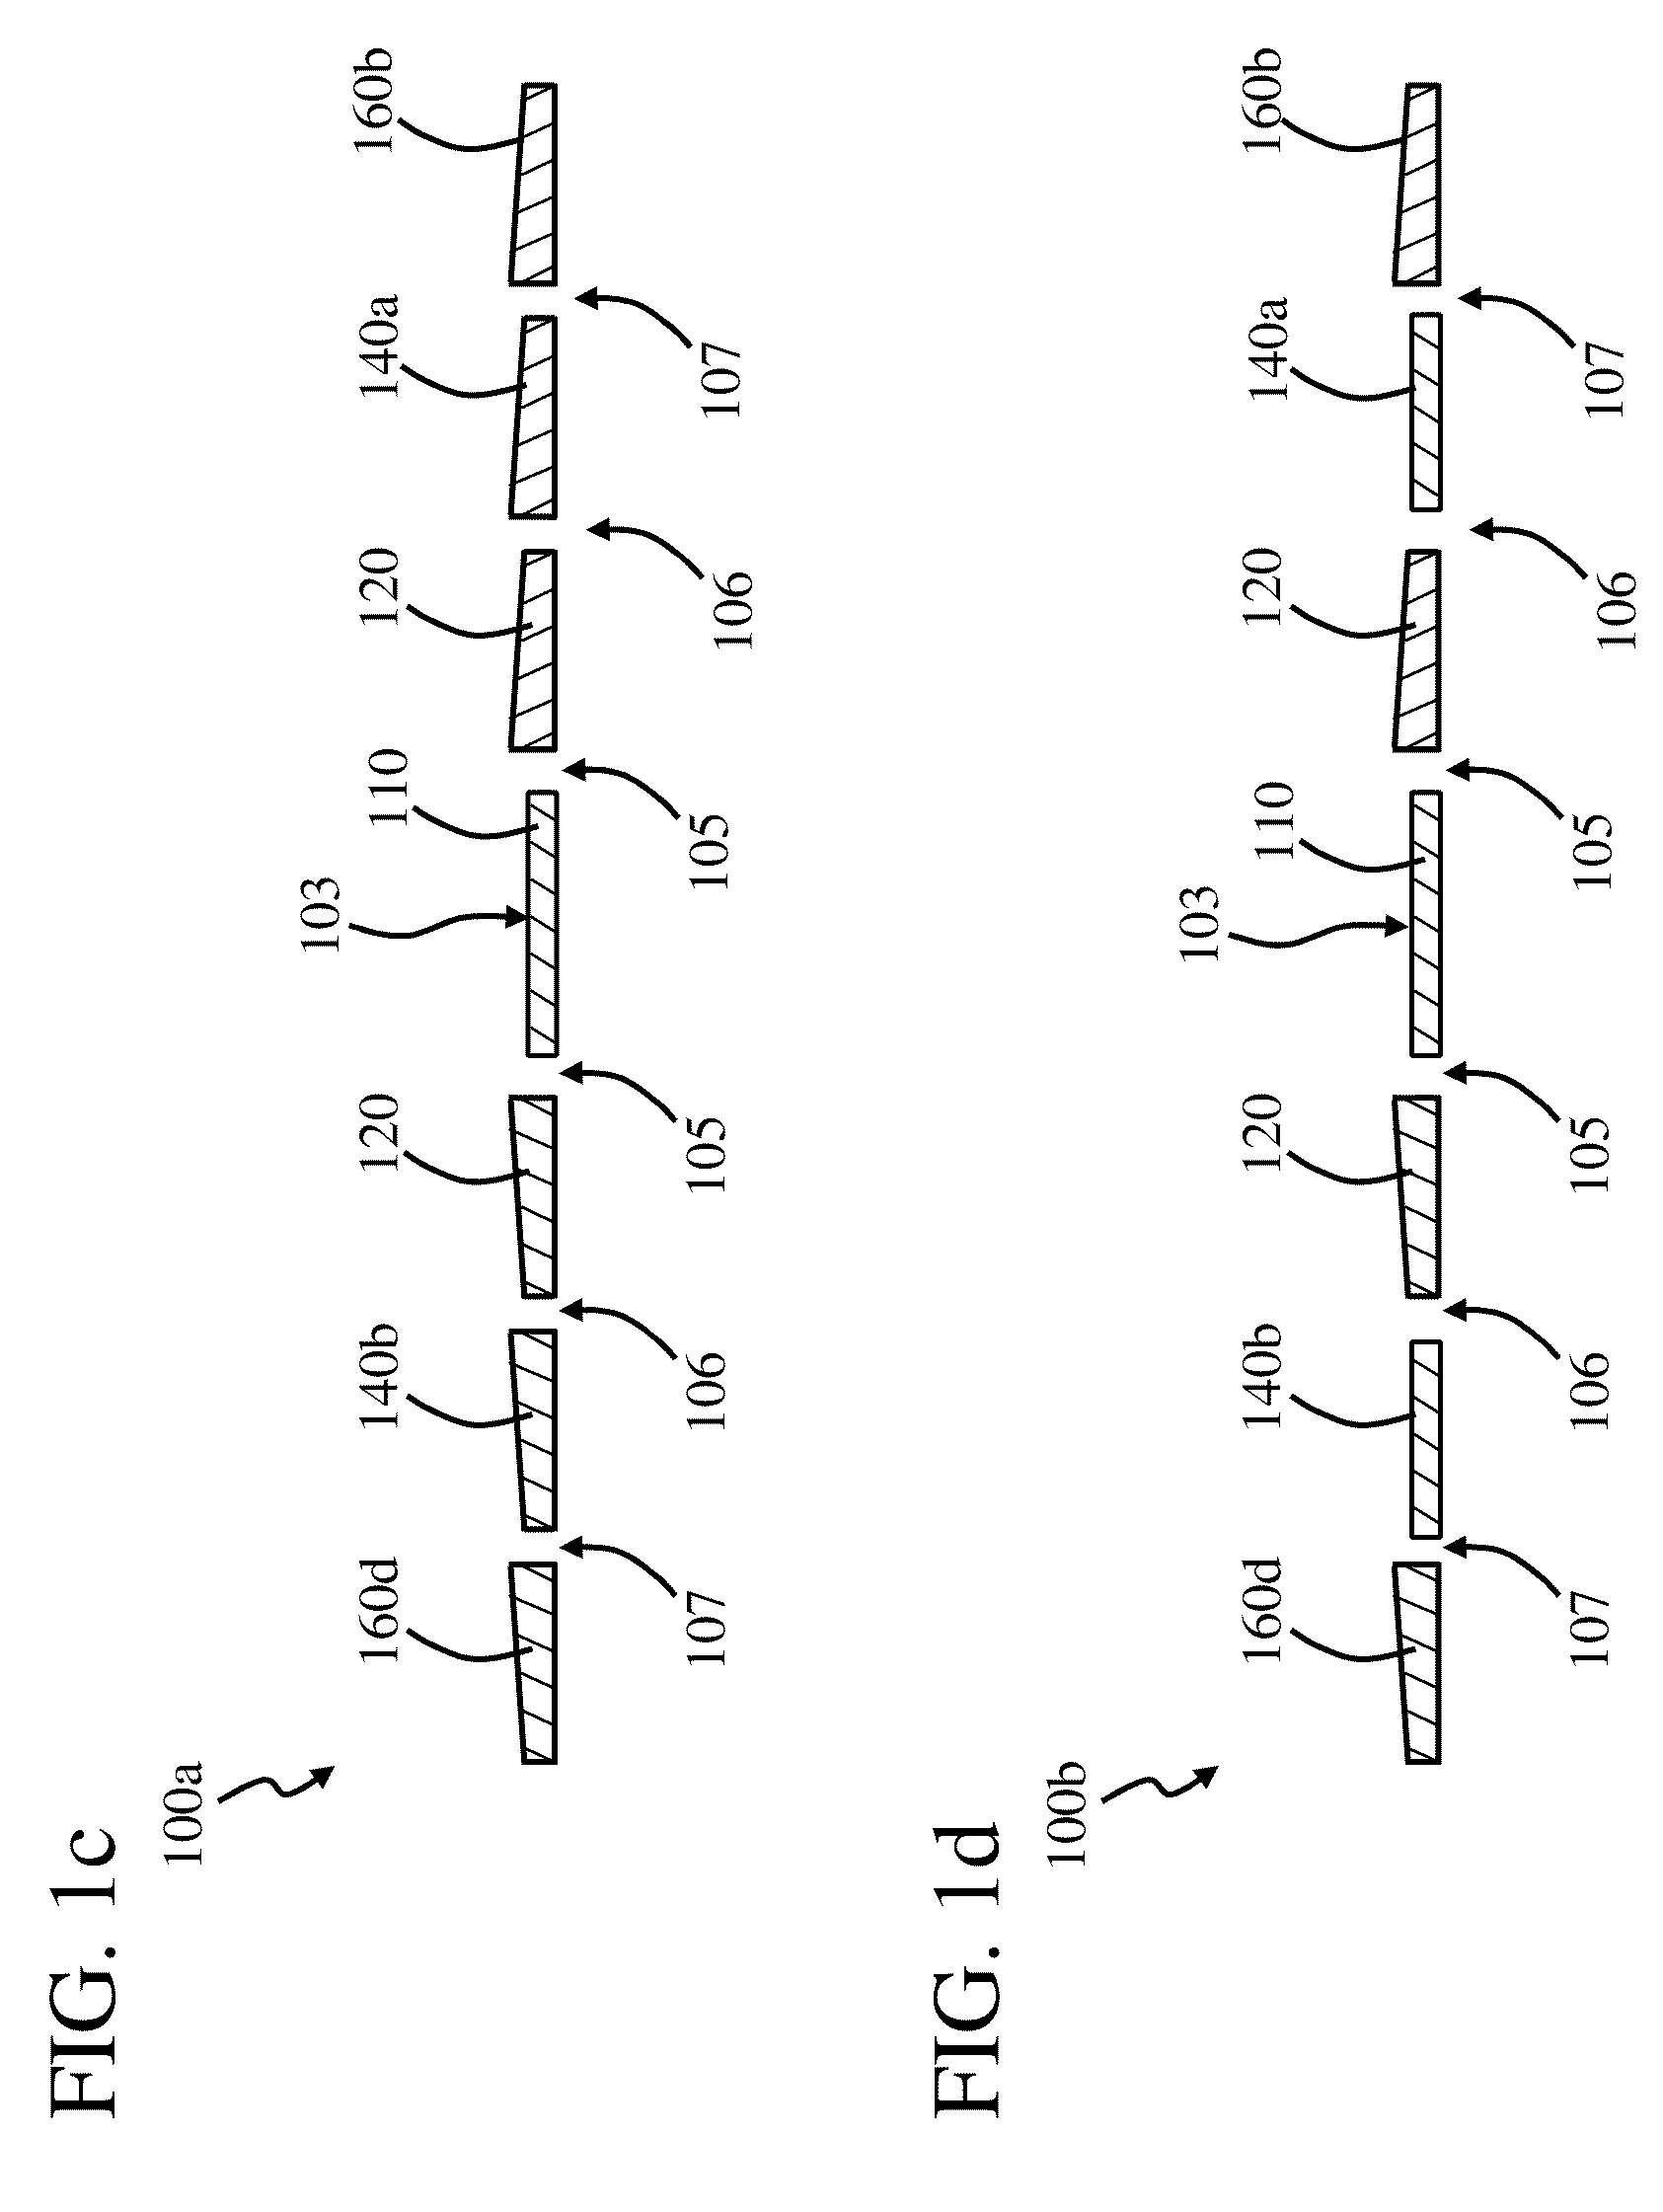 Semiconductor deposition system and method